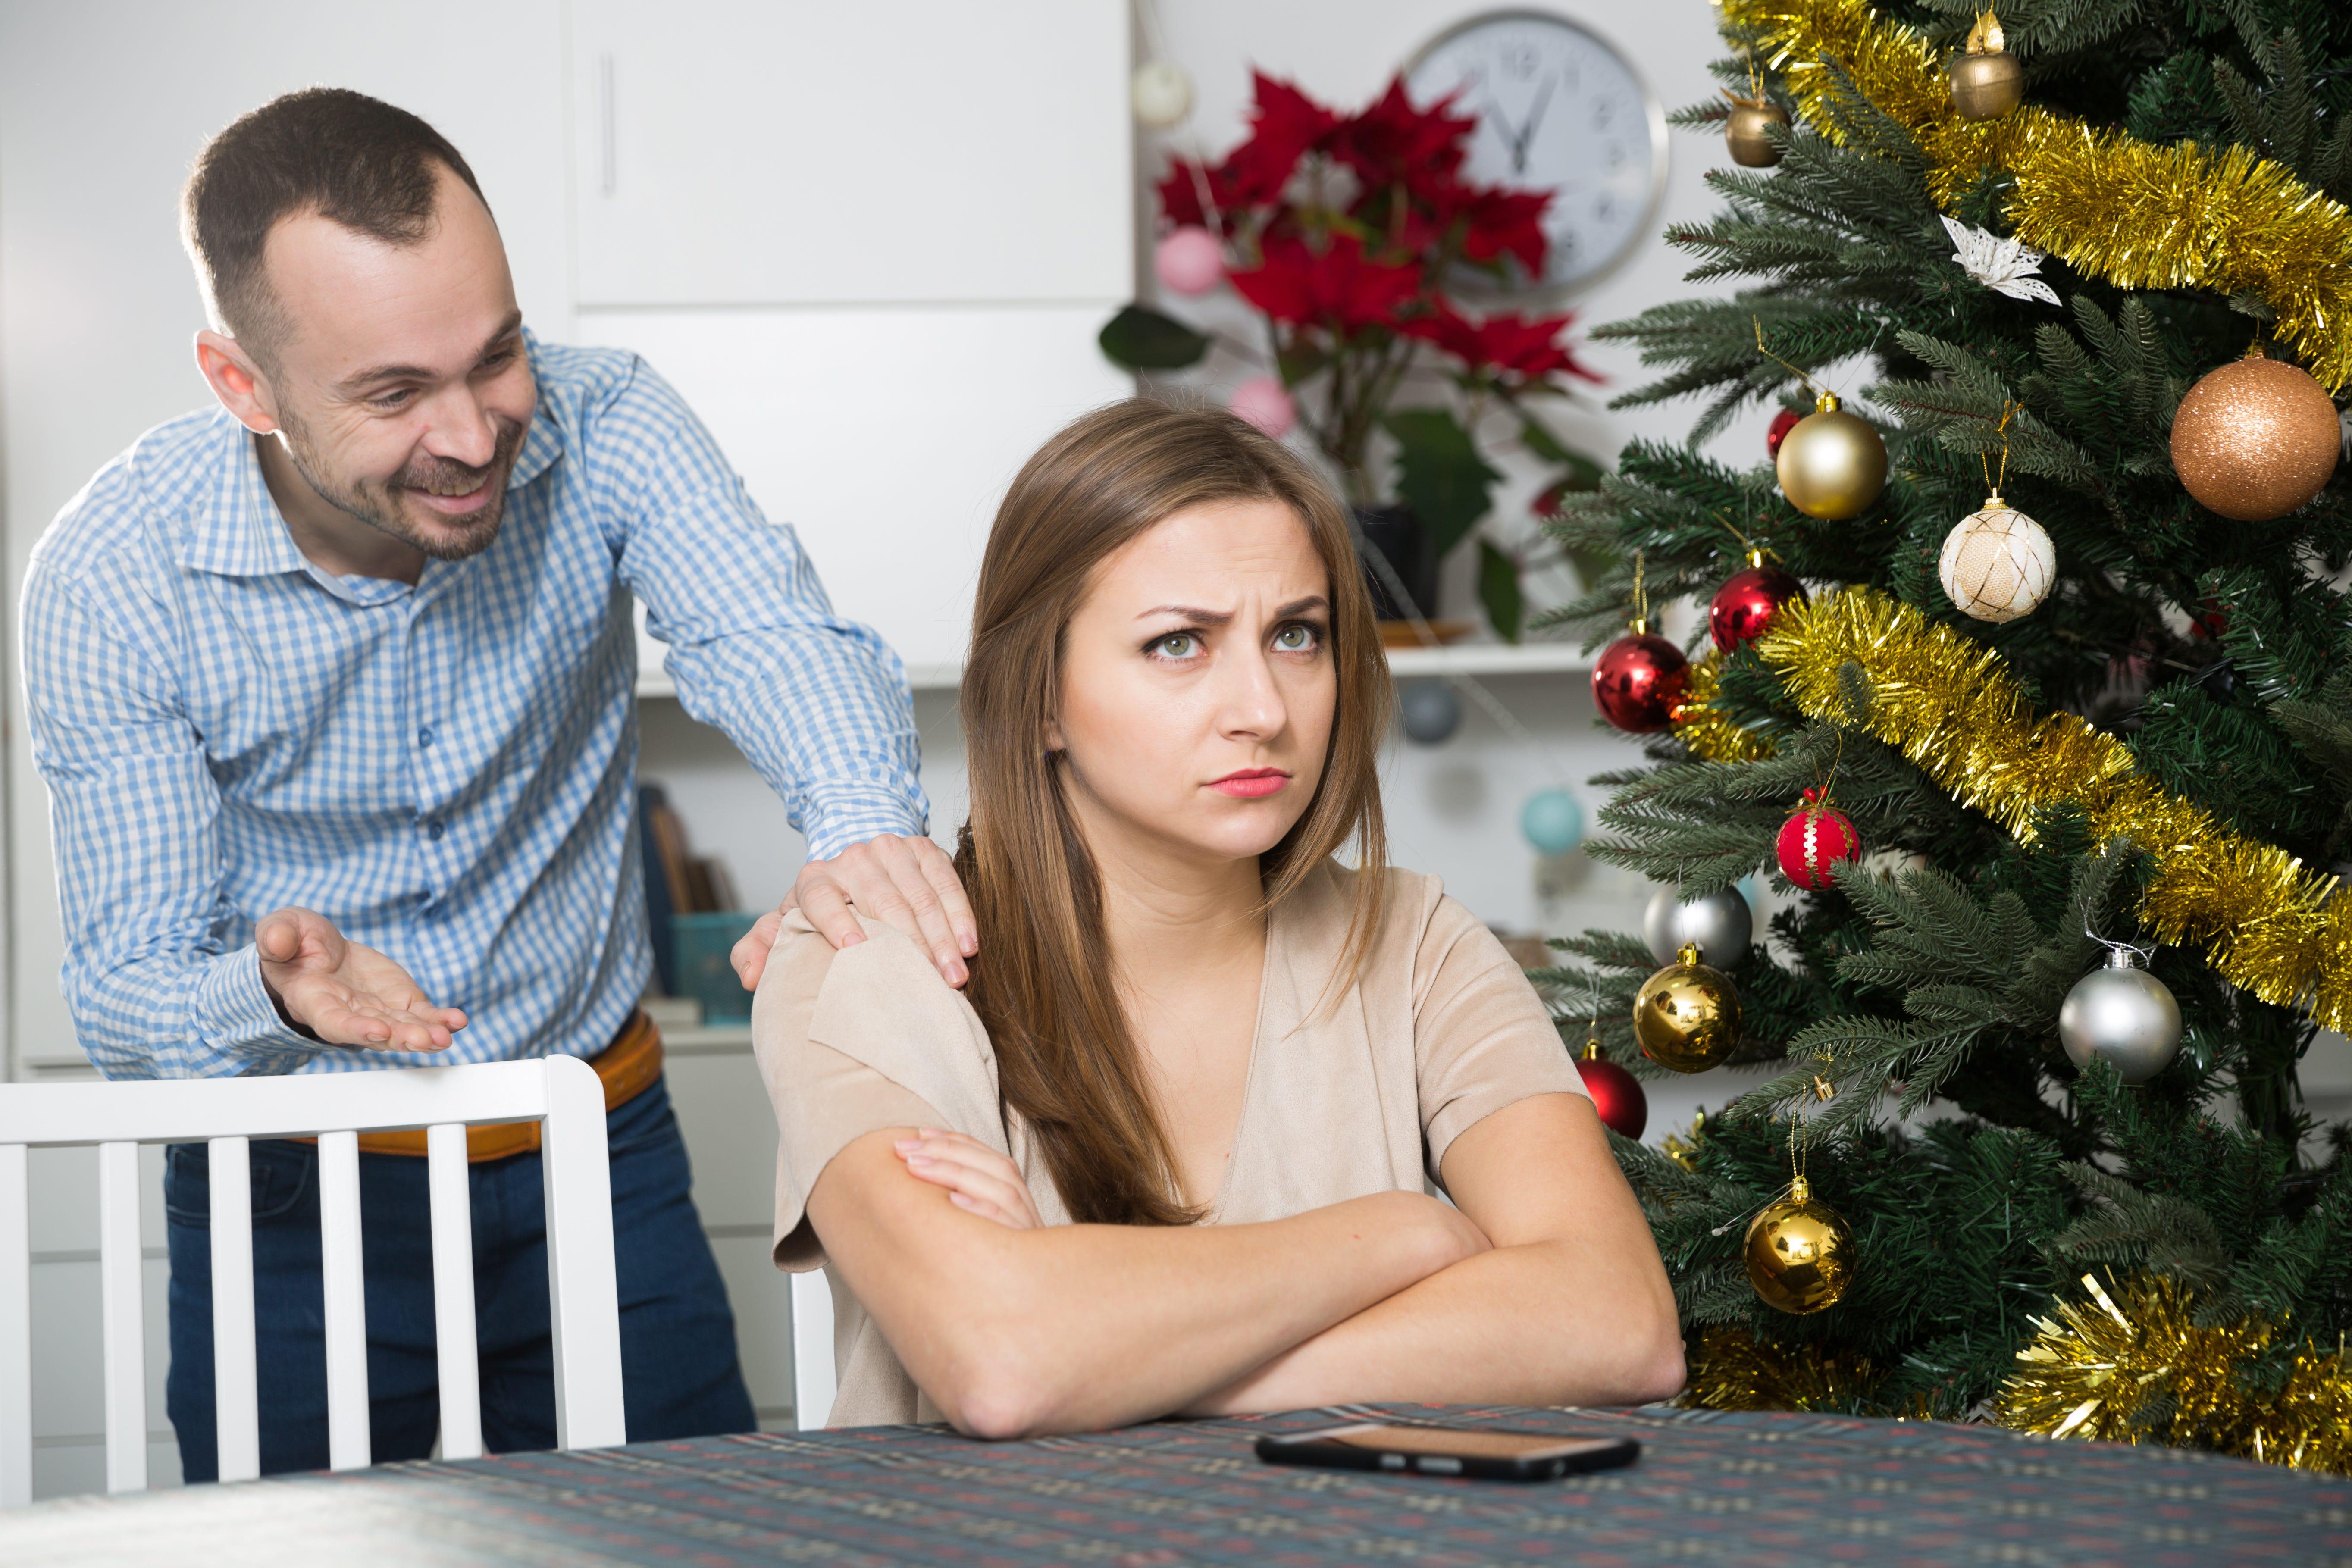 Narcissists are nightmares most of the time, and holidays are no exception. Experts say getting through Christmas, Hanukkah, New Year